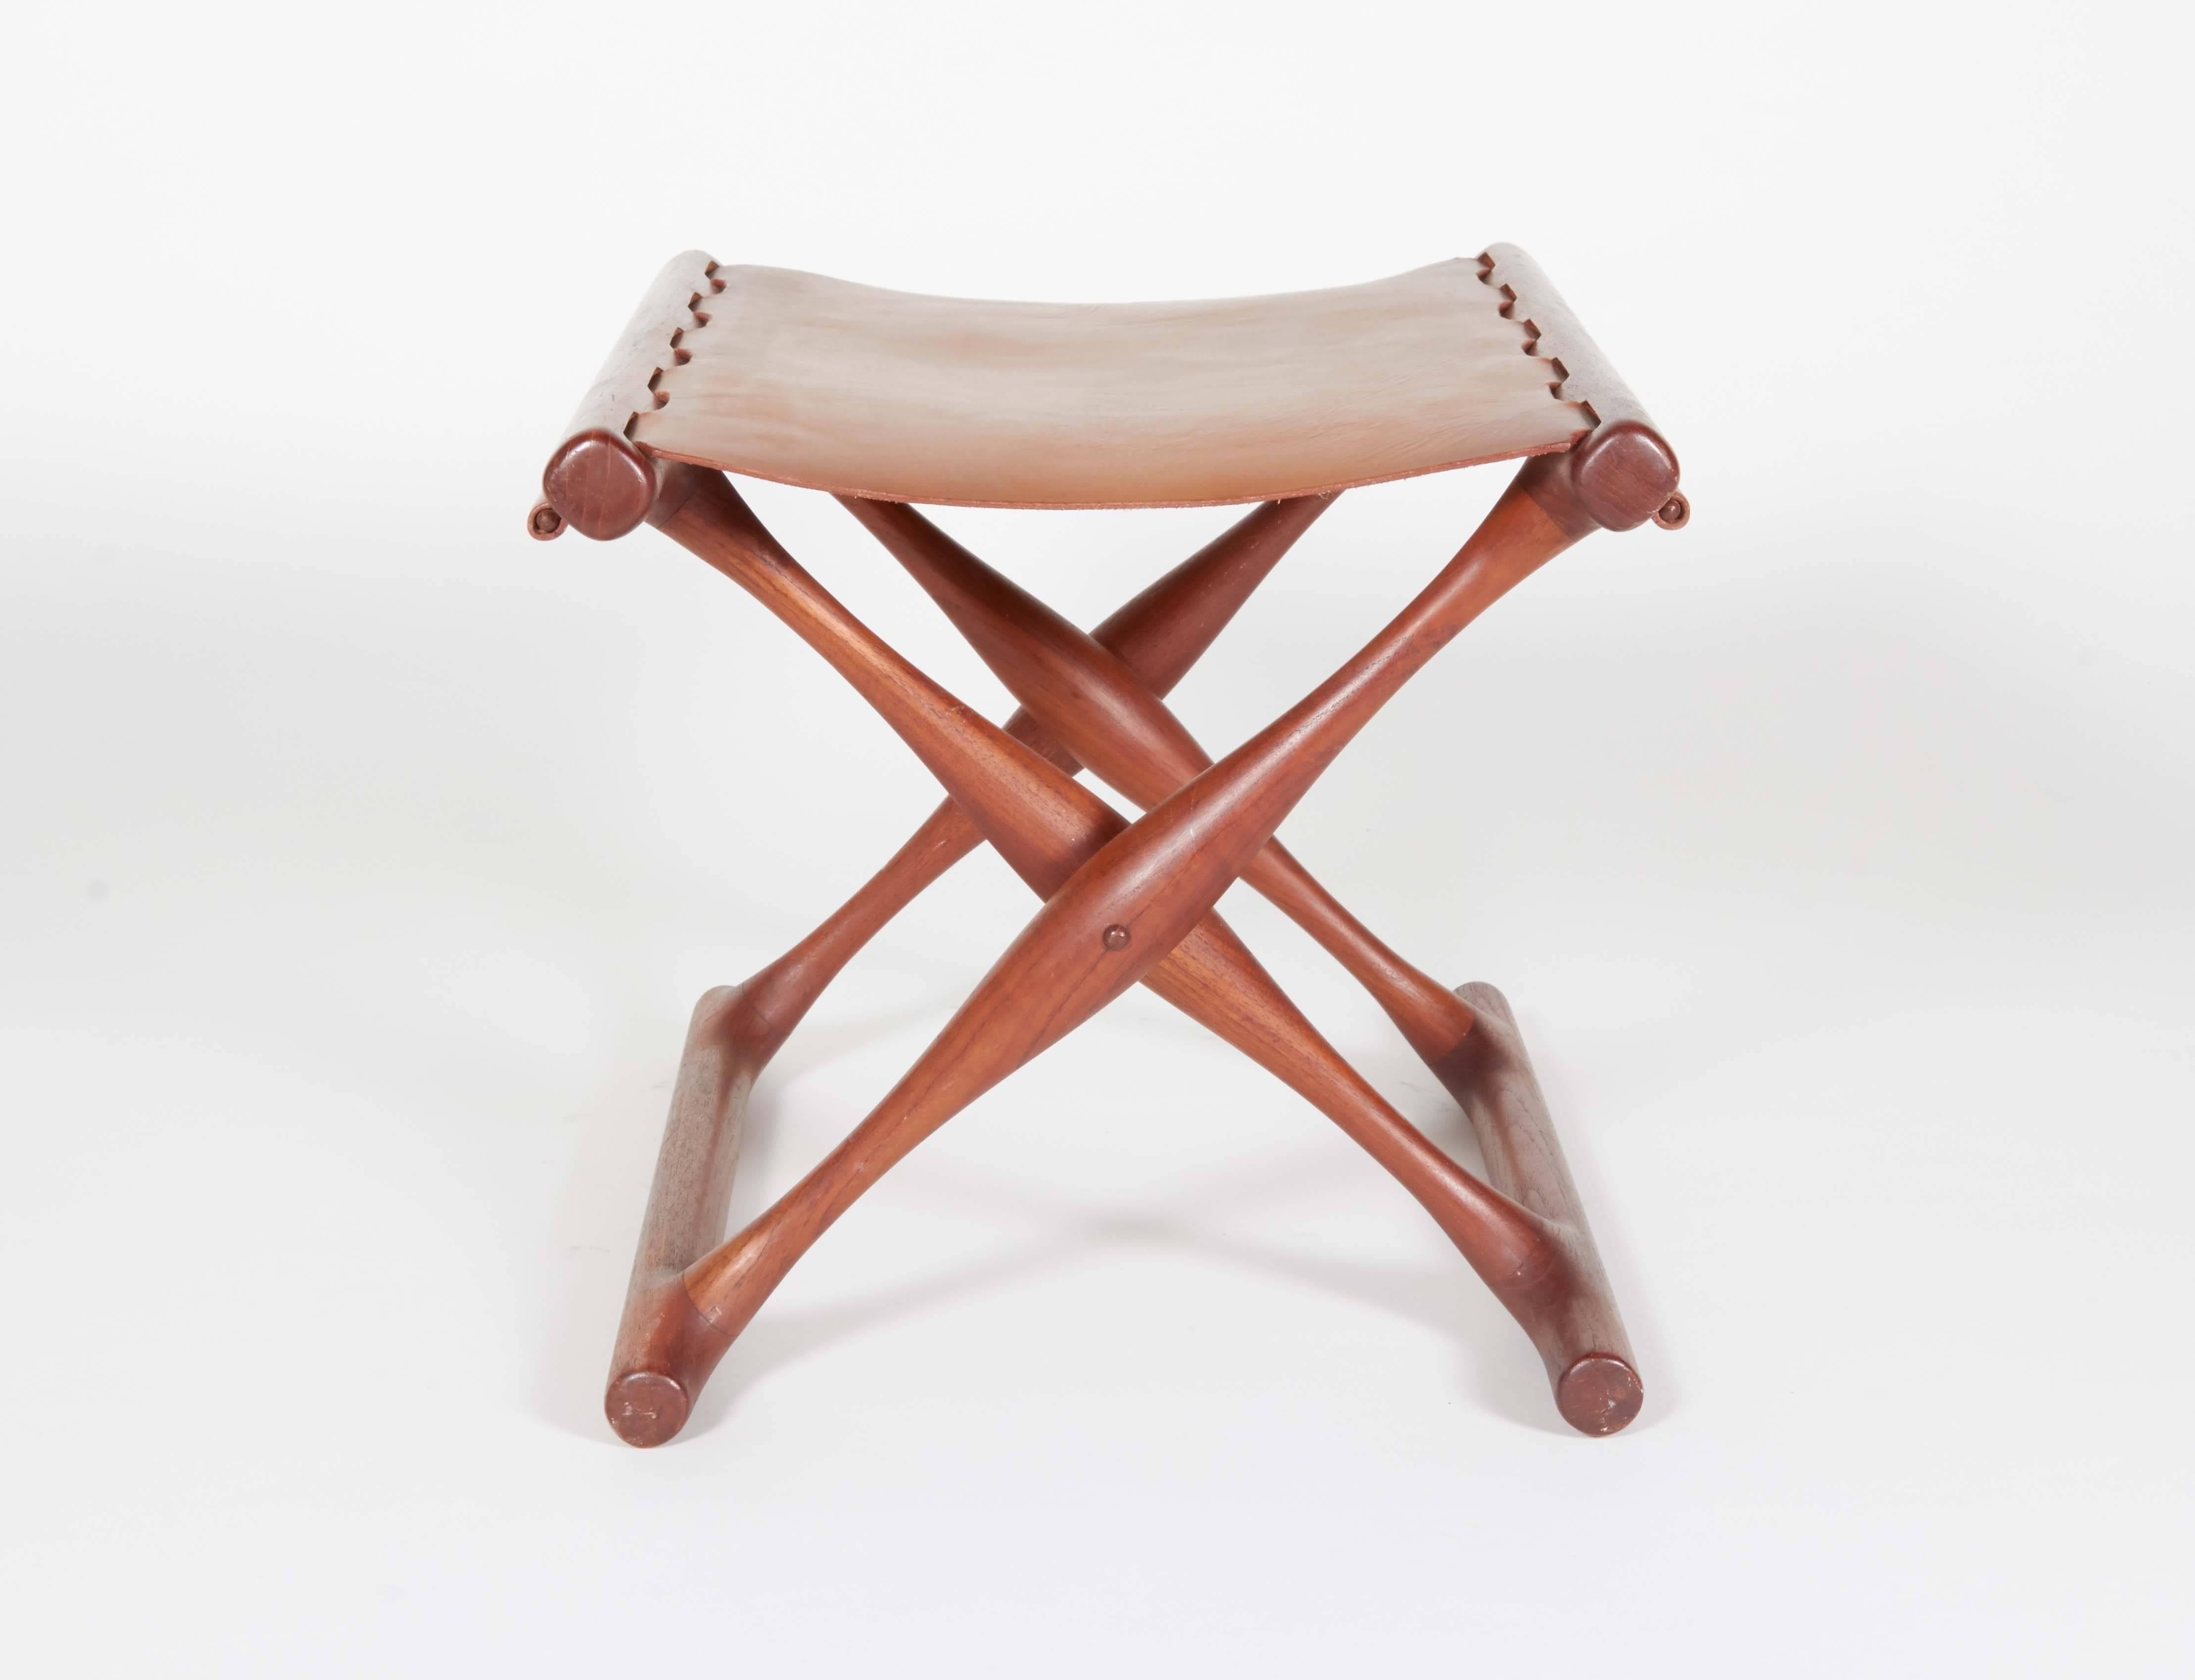 This sculptural folding stool is brilliantly constructed with wooden pins securing the original leather seat.